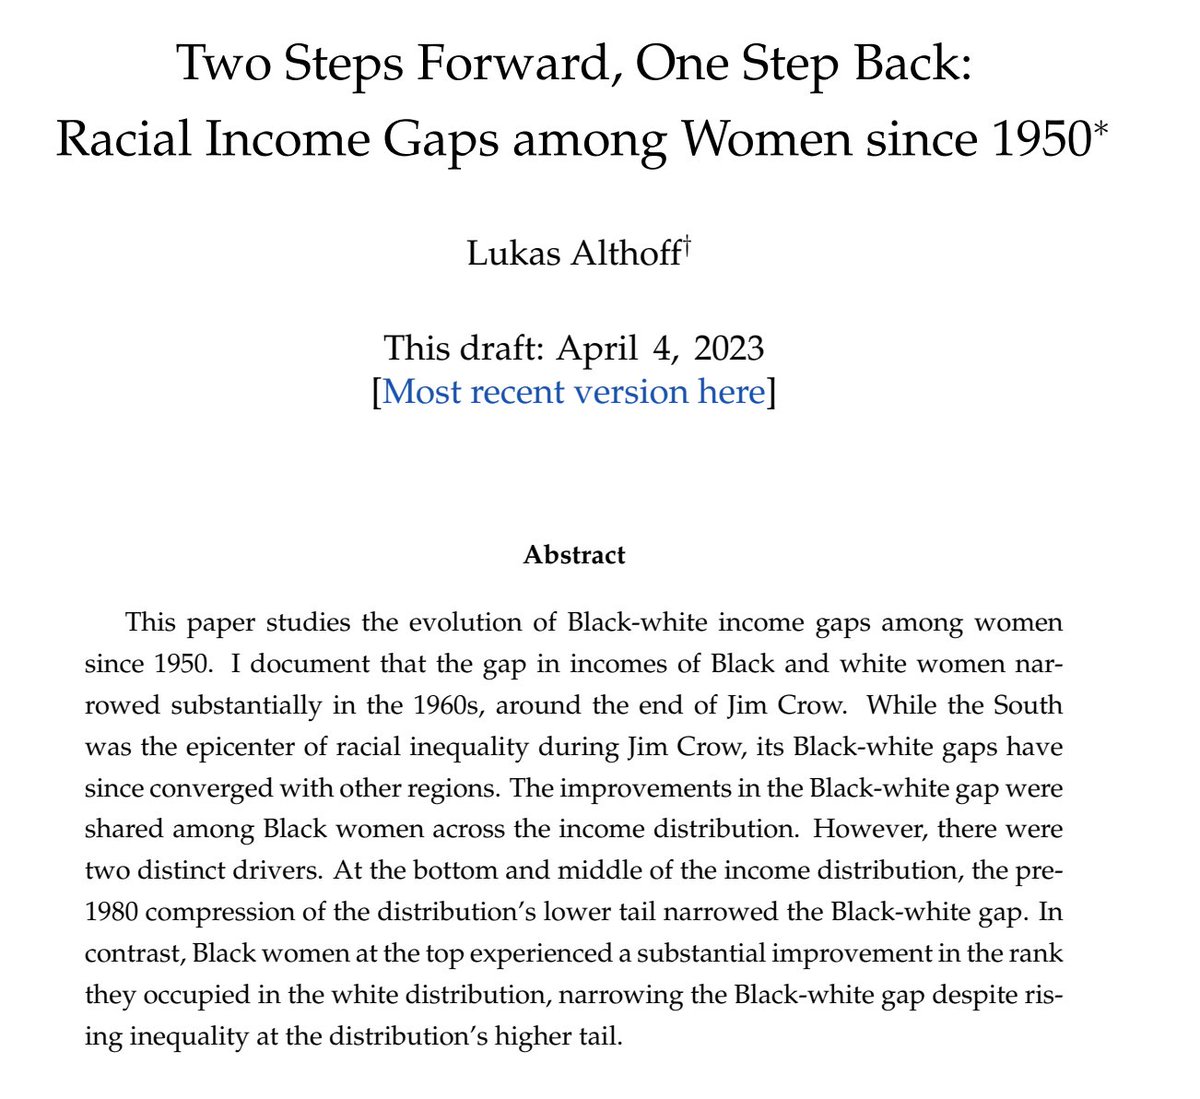 'Between 1950 and today, Black women’s household incomes have remained 25 percent or more below those of white women across the distribution.' - @AlthoffLukas 🤯